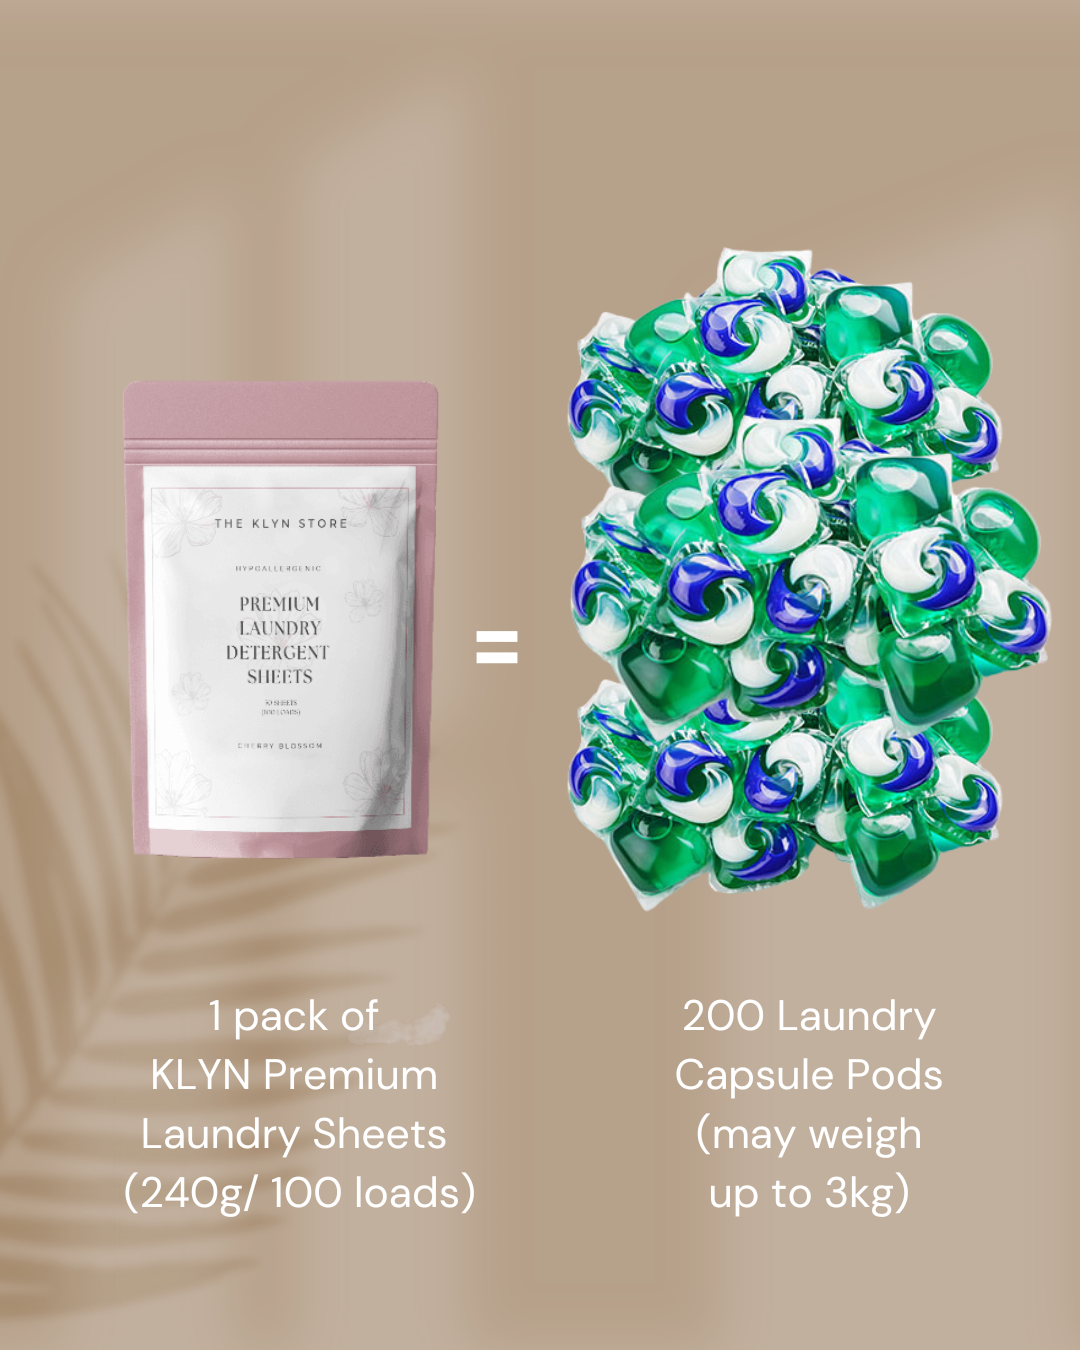 Say Hello To Happy Laundry Days! – The Klyn Store